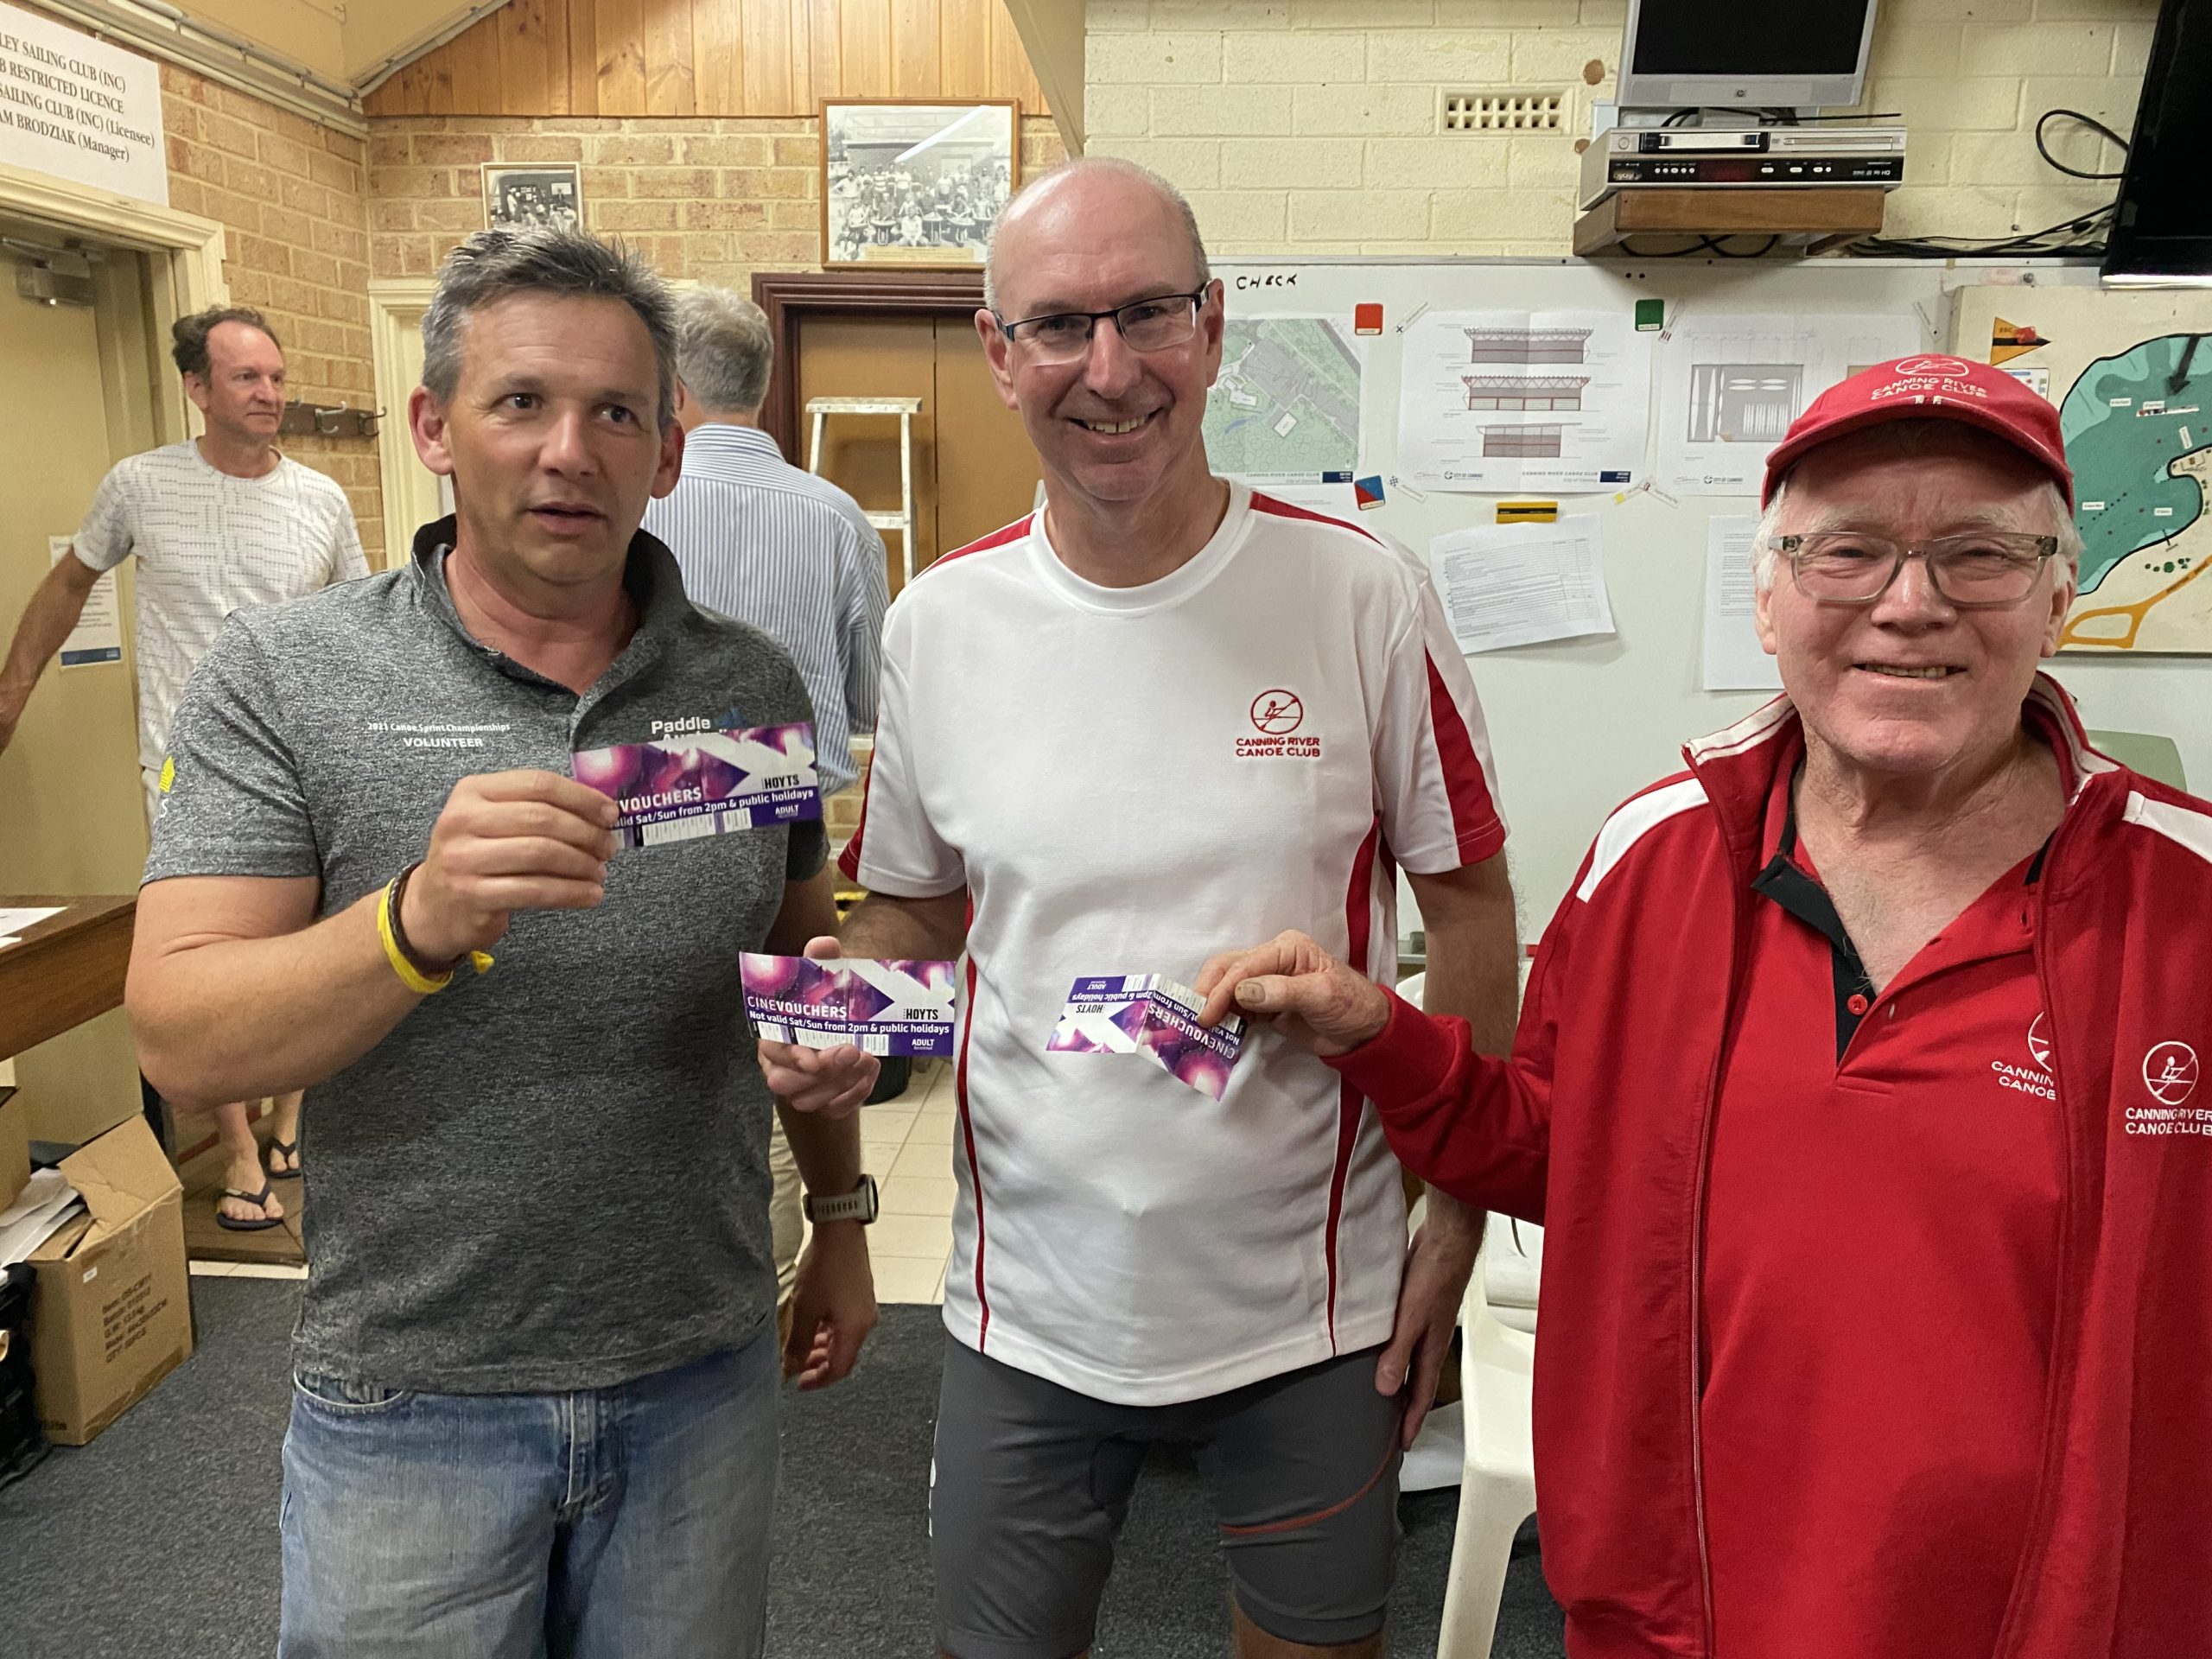 Tuesday 21st September 2021 : Tonight’s photos shows Club member David Boldy who came second presenting tonight’s winners David Urquhart and David Gardiner with a movie voucher.